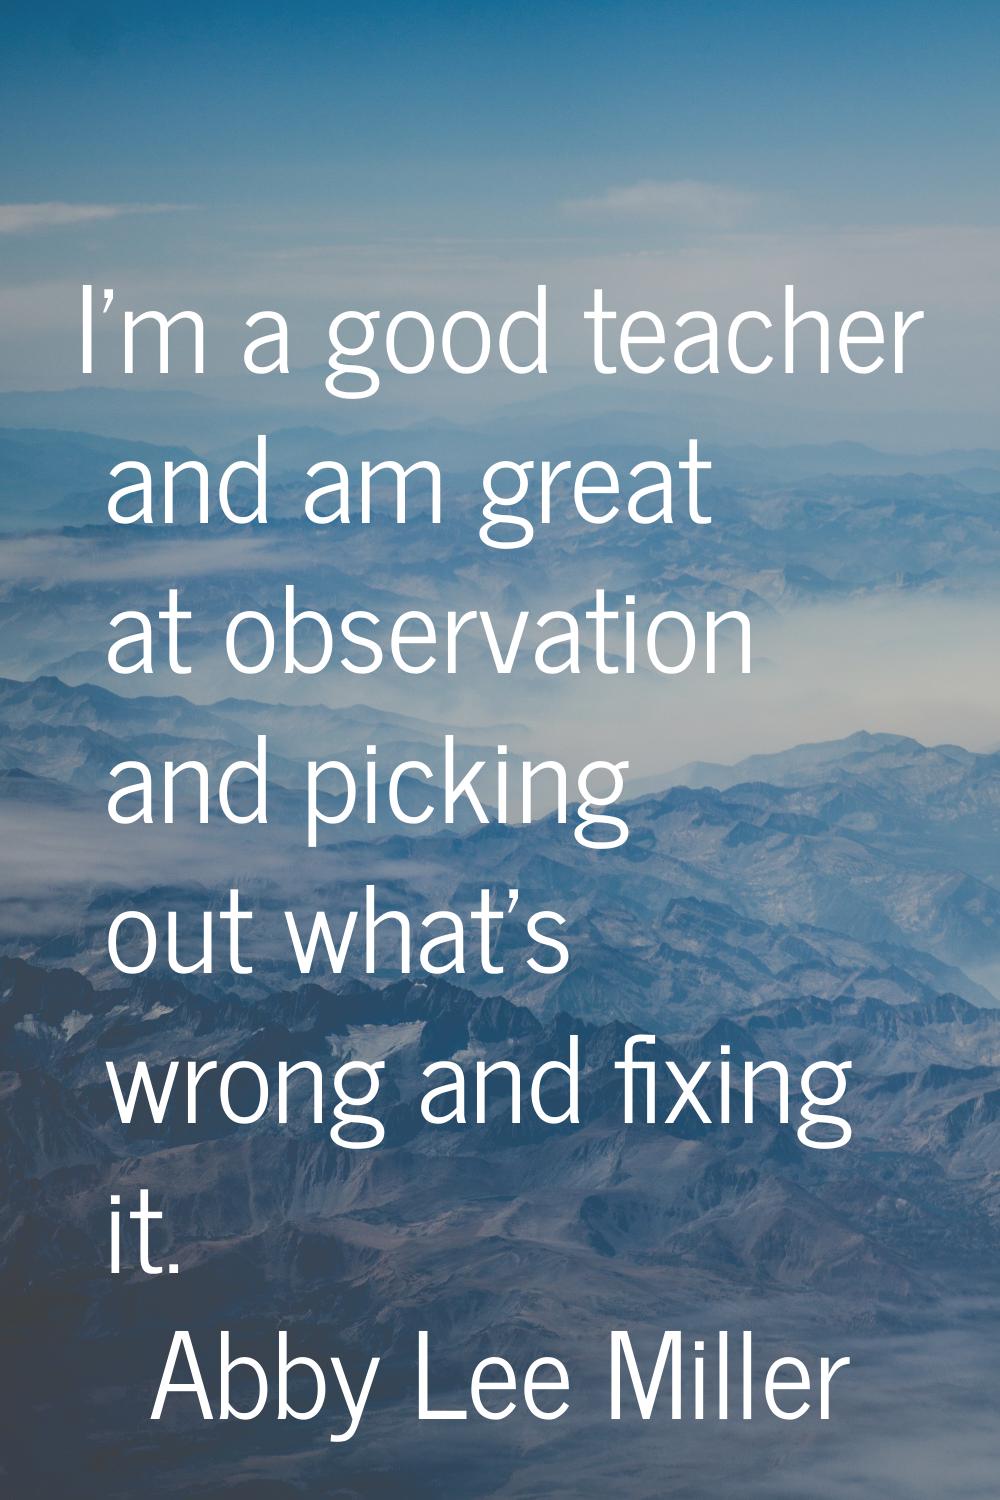 I'm a good teacher and am great at observation and picking out what's wrong and fixing it.